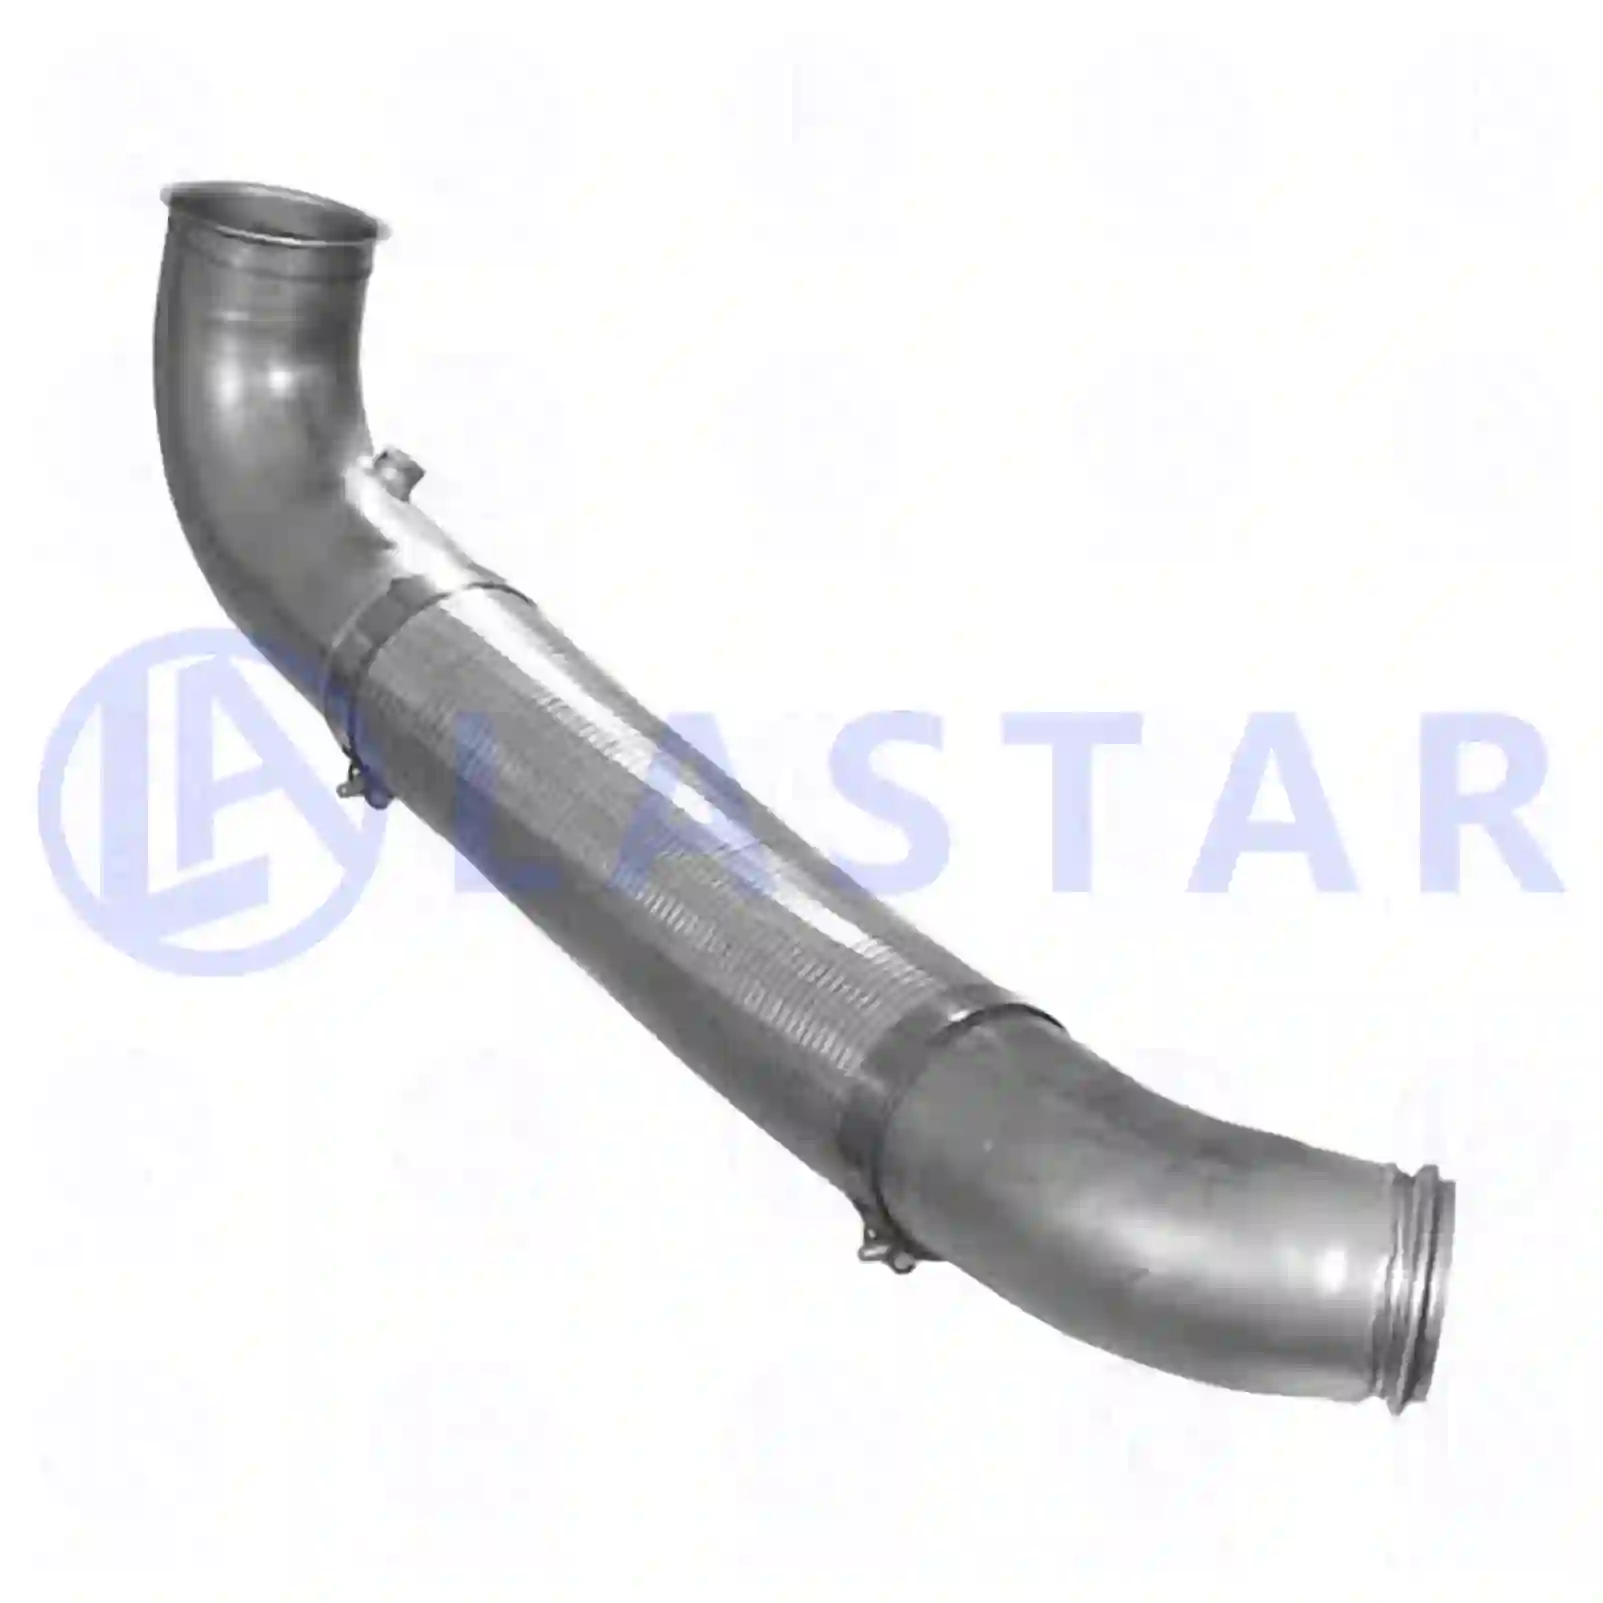 Exhaust pipe, 77707015, 1852050, 2260787, ZG10291-0008 ||  77707015 Lastar Spare Part | Truck Spare Parts, Auotomotive Spare Parts Exhaust pipe, 77707015, 1852050, 2260787, ZG10291-0008 ||  77707015 Lastar Spare Part | Truck Spare Parts, Auotomotive Spare Parts